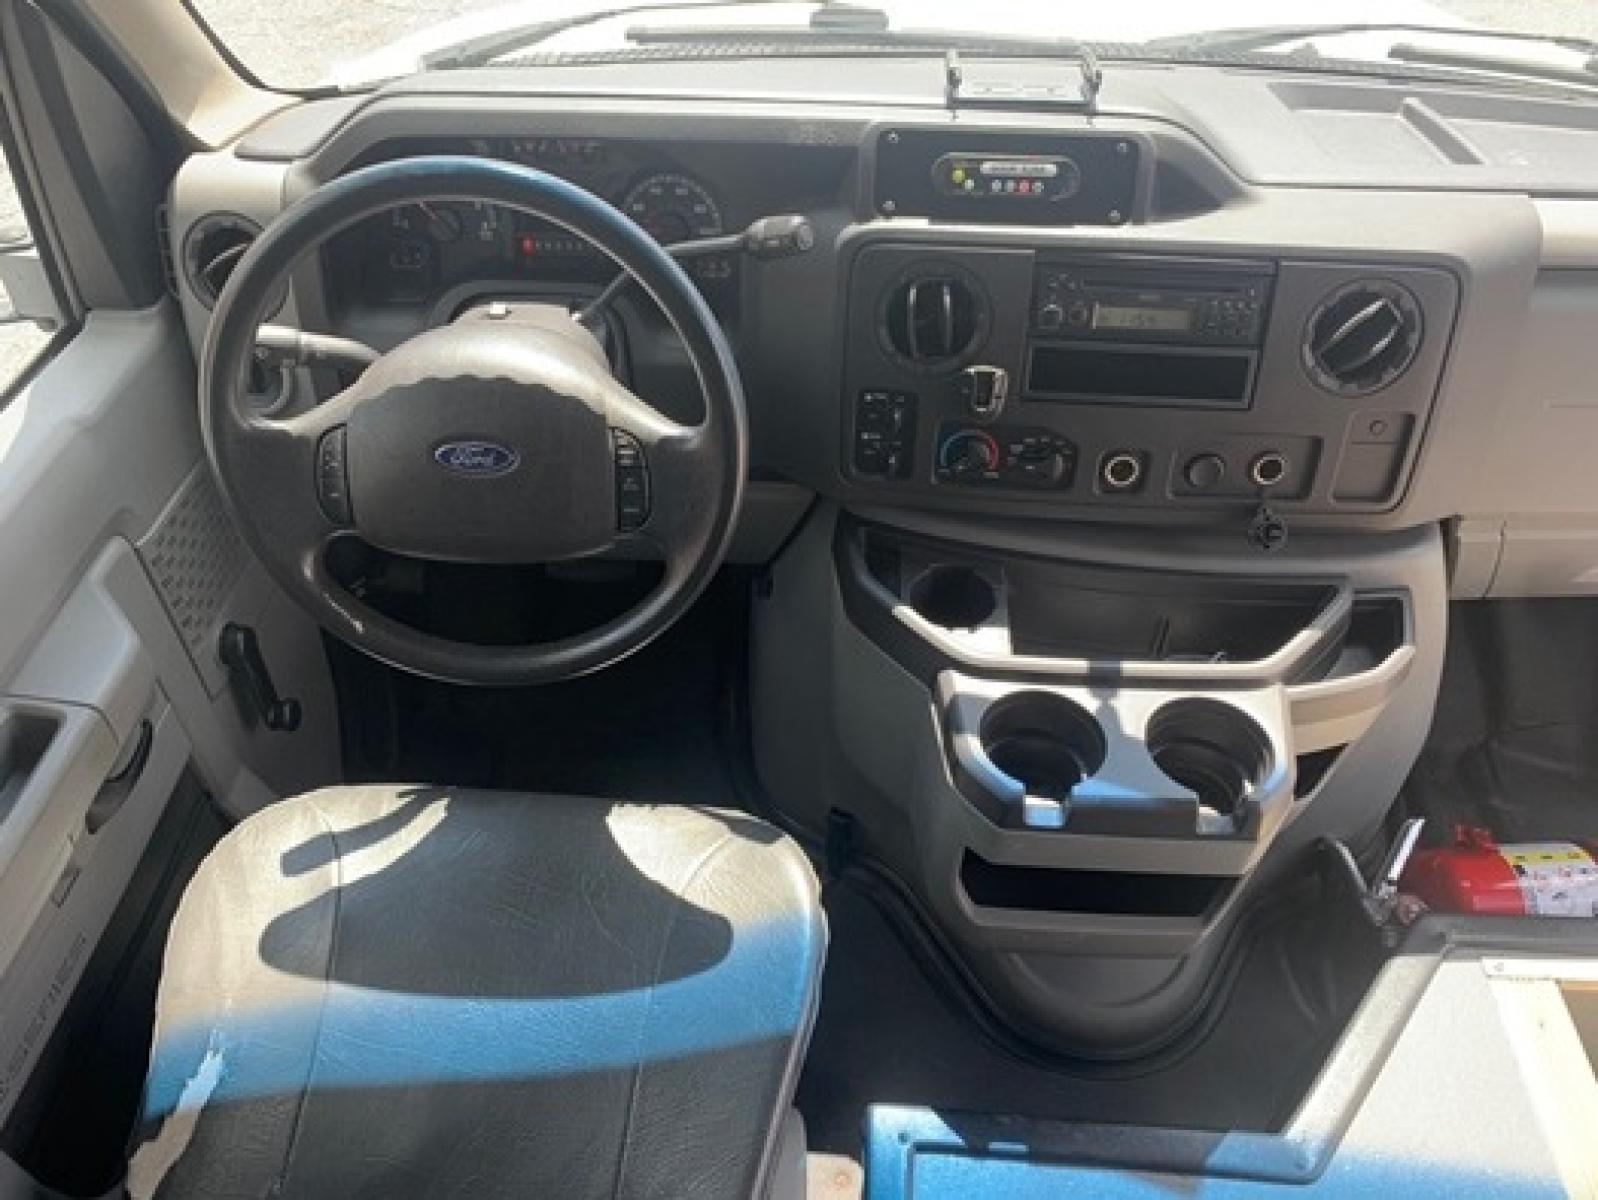 2012 White /Blue Ford E350 with an 5.4L engine, Auto transmission, 0.000000, 0.000000 - 2012 Ford E-350 Starcraft Conversion - 5.4L V8 Gas Engine - Automatic Trans - Electric Entrance Door - 8 Passengers + 2 Wheelchairs - Mid Back Seats - Retractable Seat Belts - Stainless Wheel Simulators - Front and Rear A/C - Handicap Lift - 6 New Tire s - Photo #6